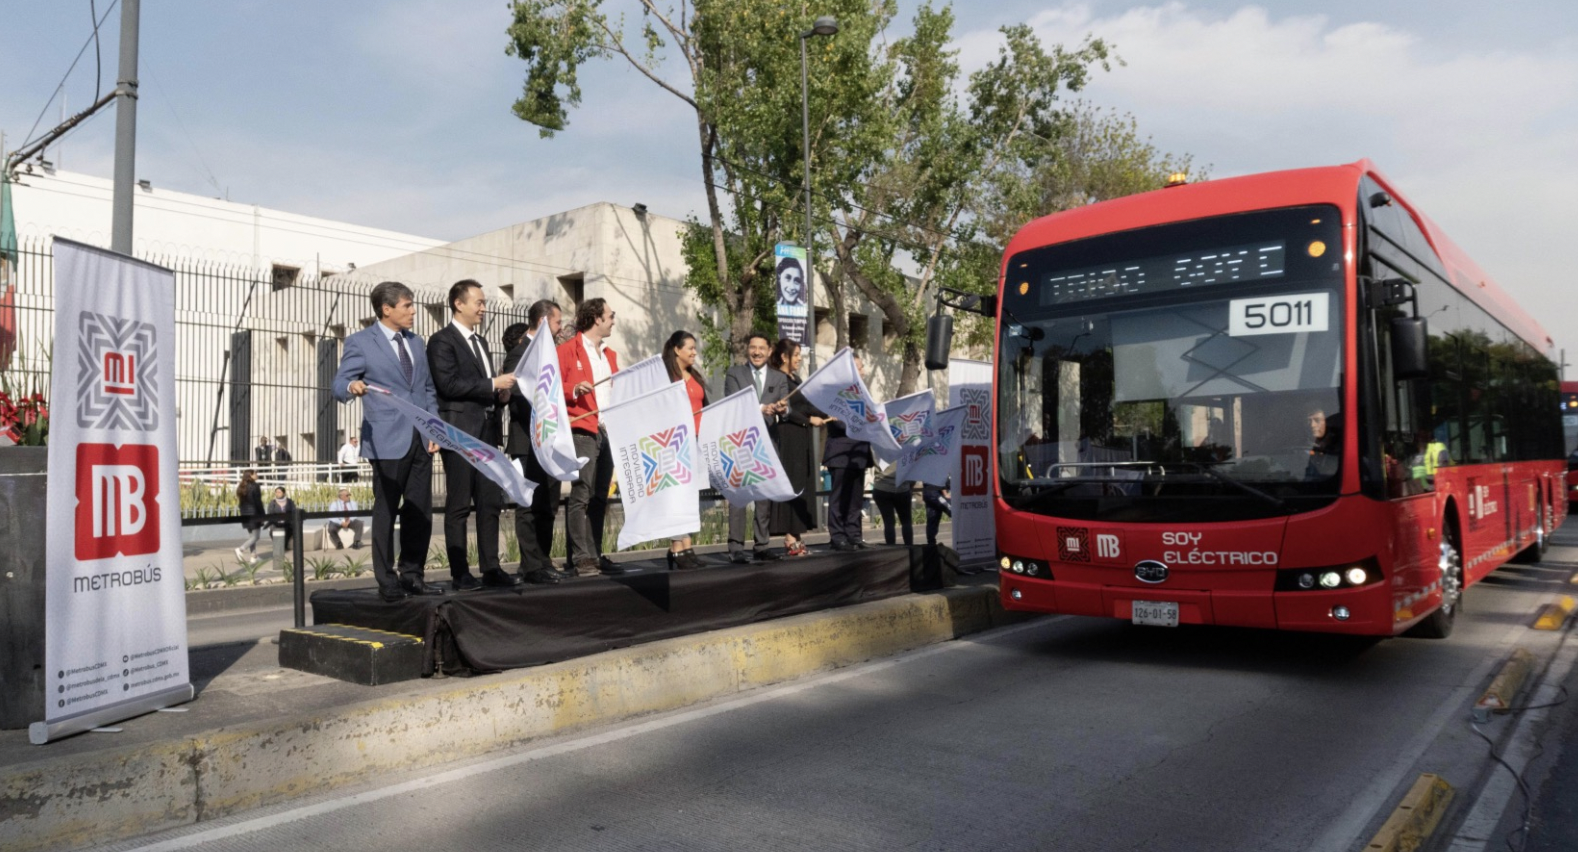 byd mexico city metrobus delivery buses